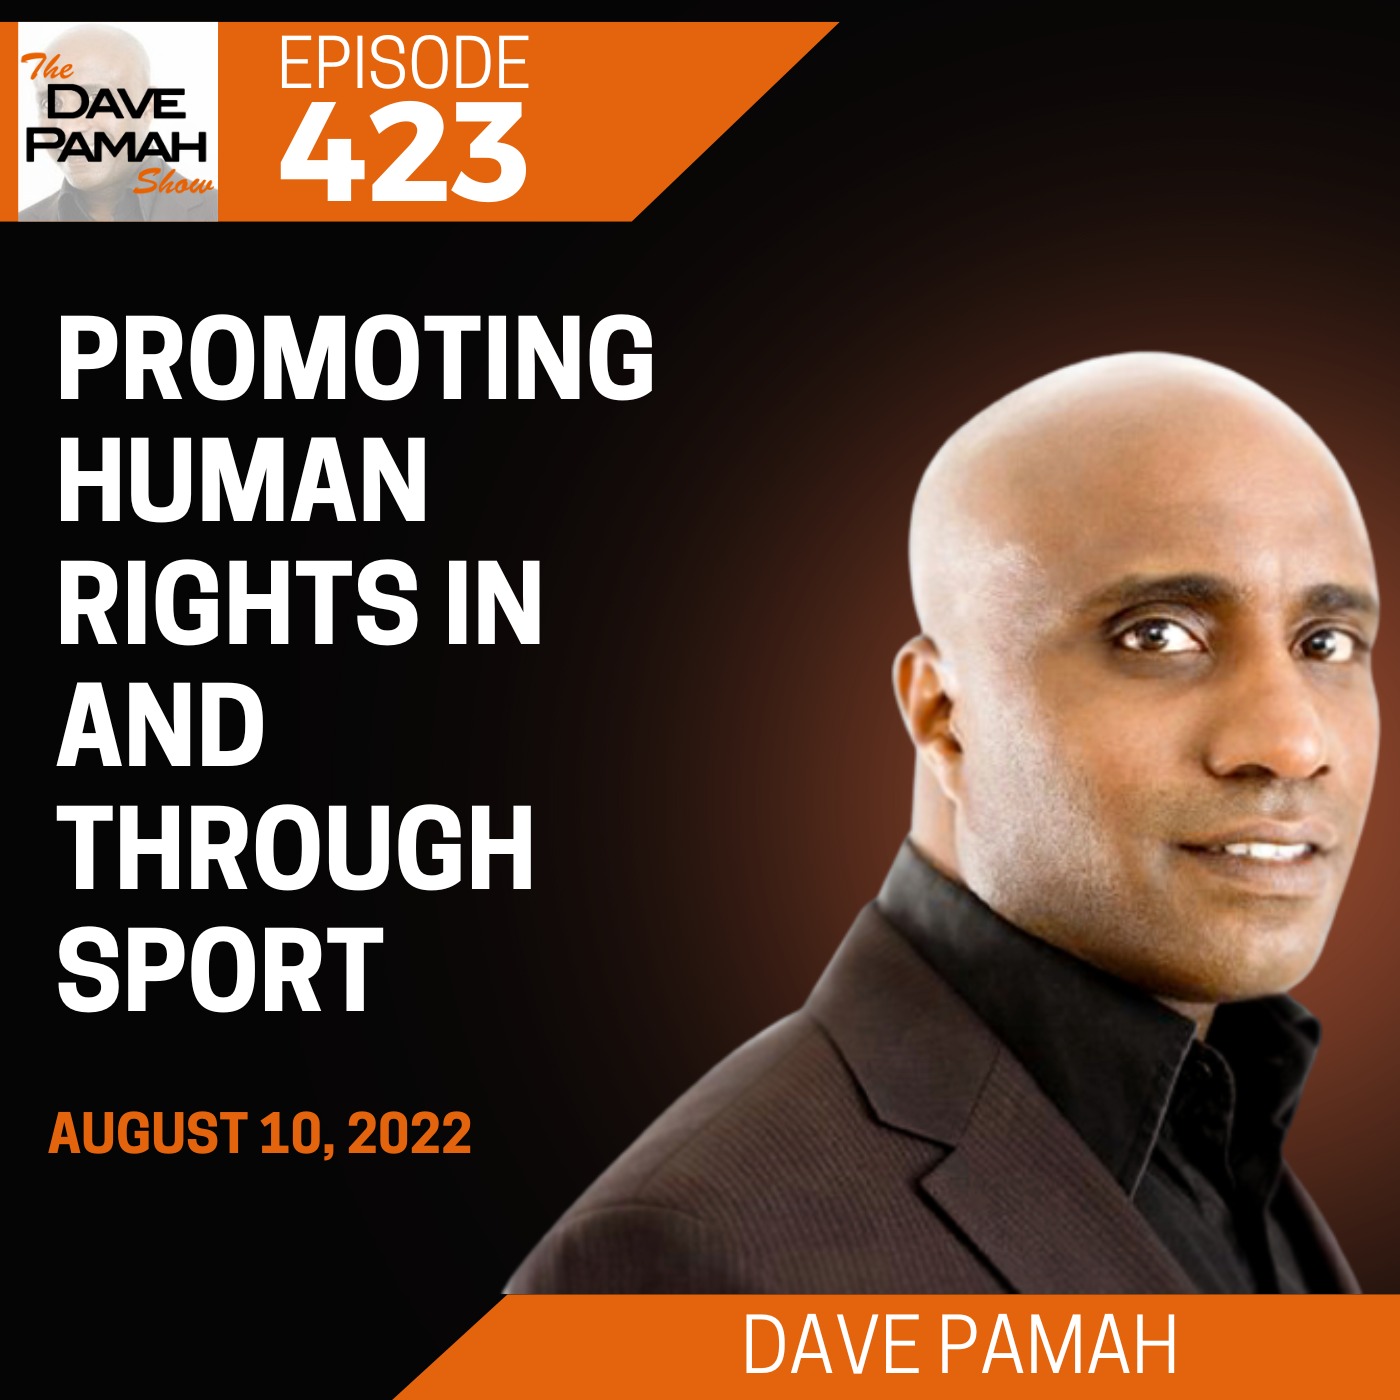 Promoting Human Rights in and through Sport